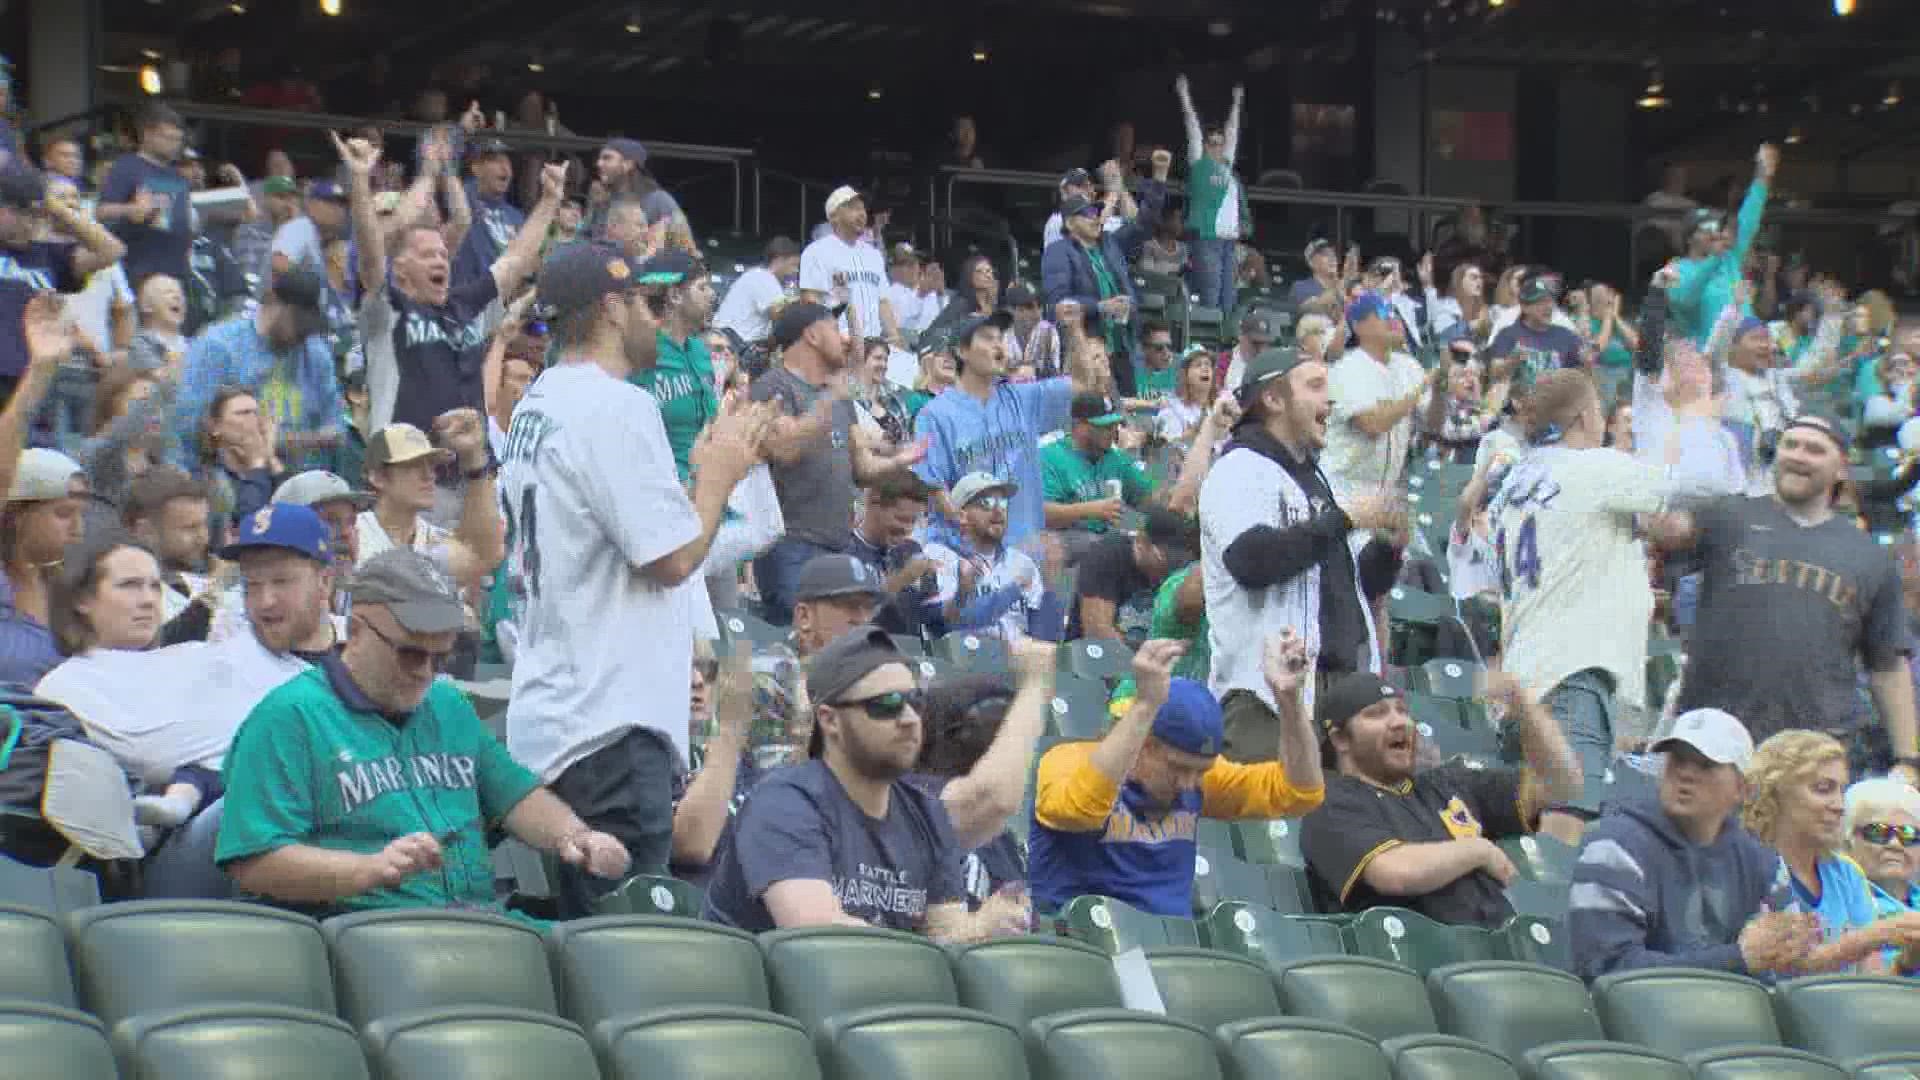 Fans watched and celebrated the team's win over the Blue Jays at T-Mobile Park on Oct. 7.